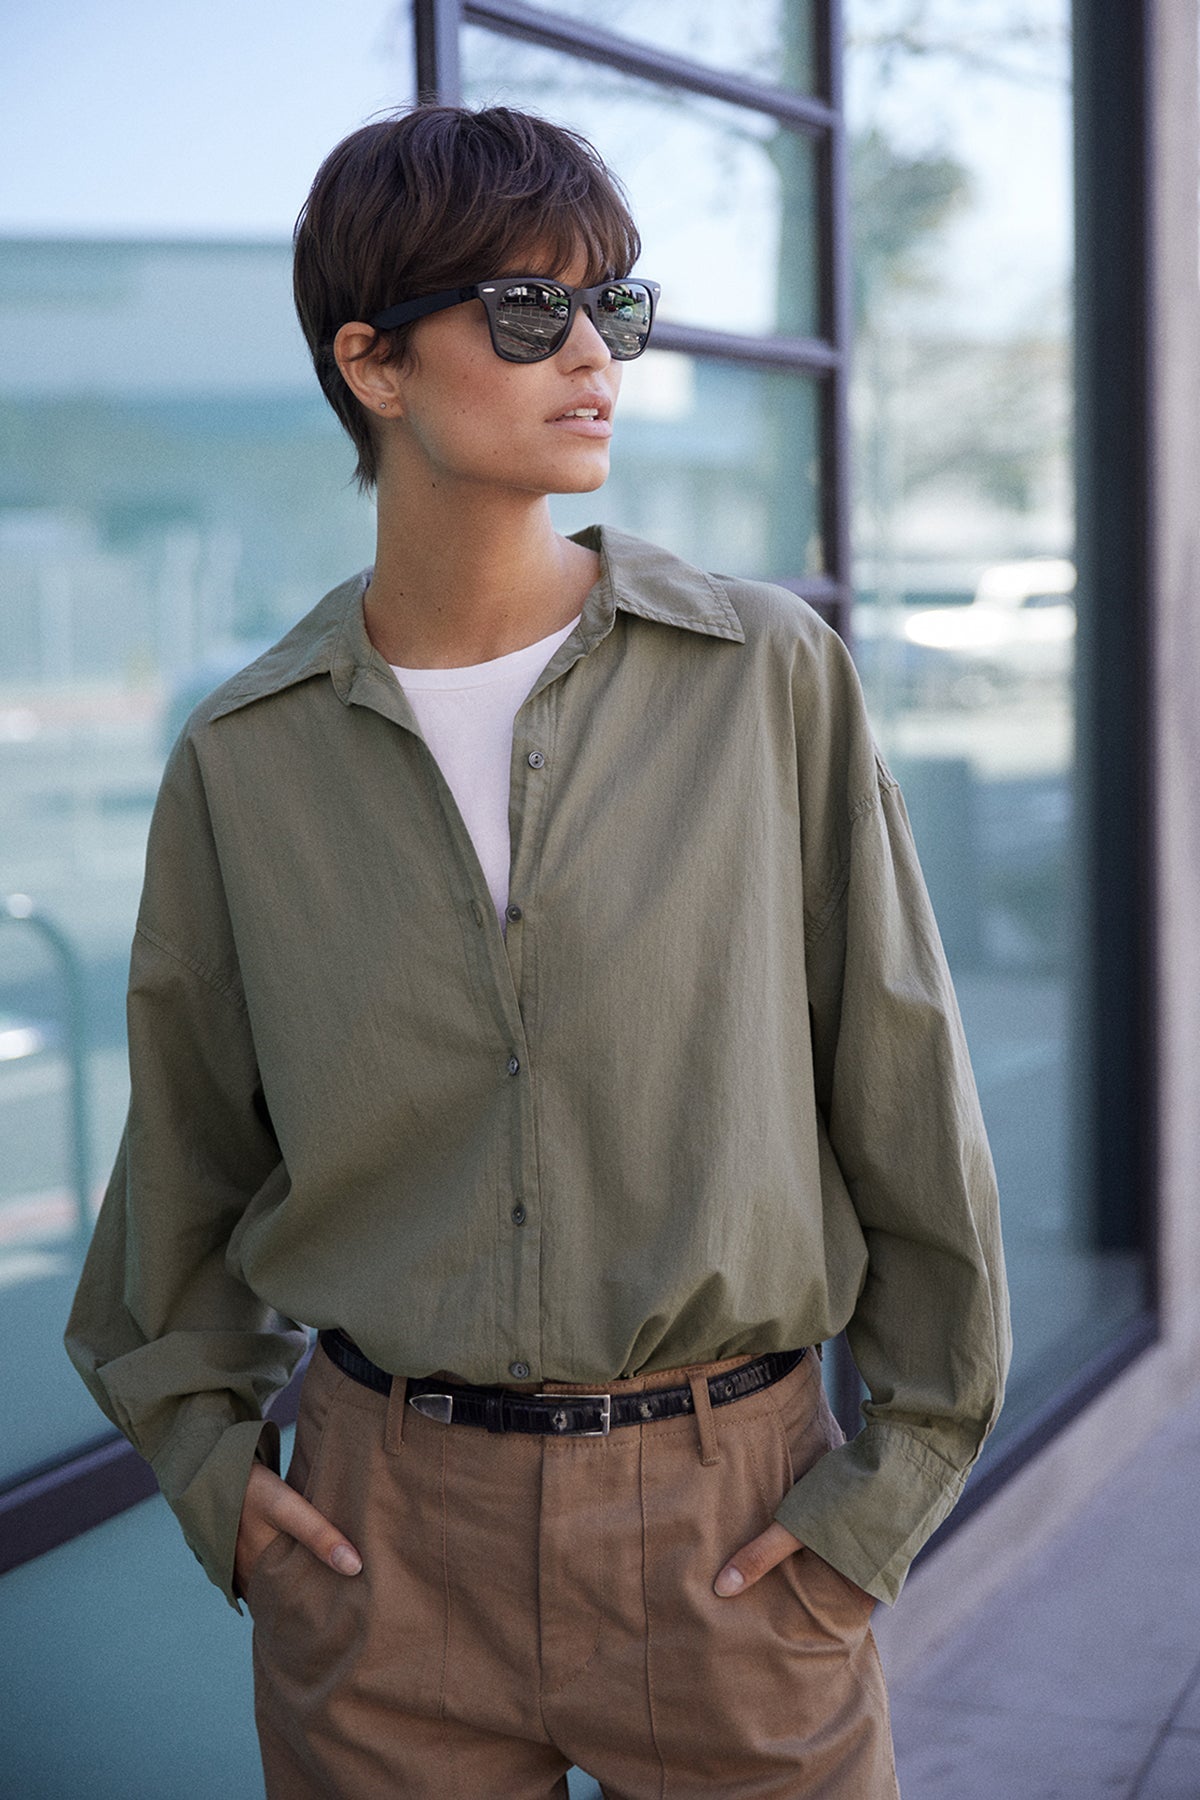 Redondo Shirt in thicket tucked into Ventura Pant front, model wearing sunglasses and black thin belt.-25870844199105